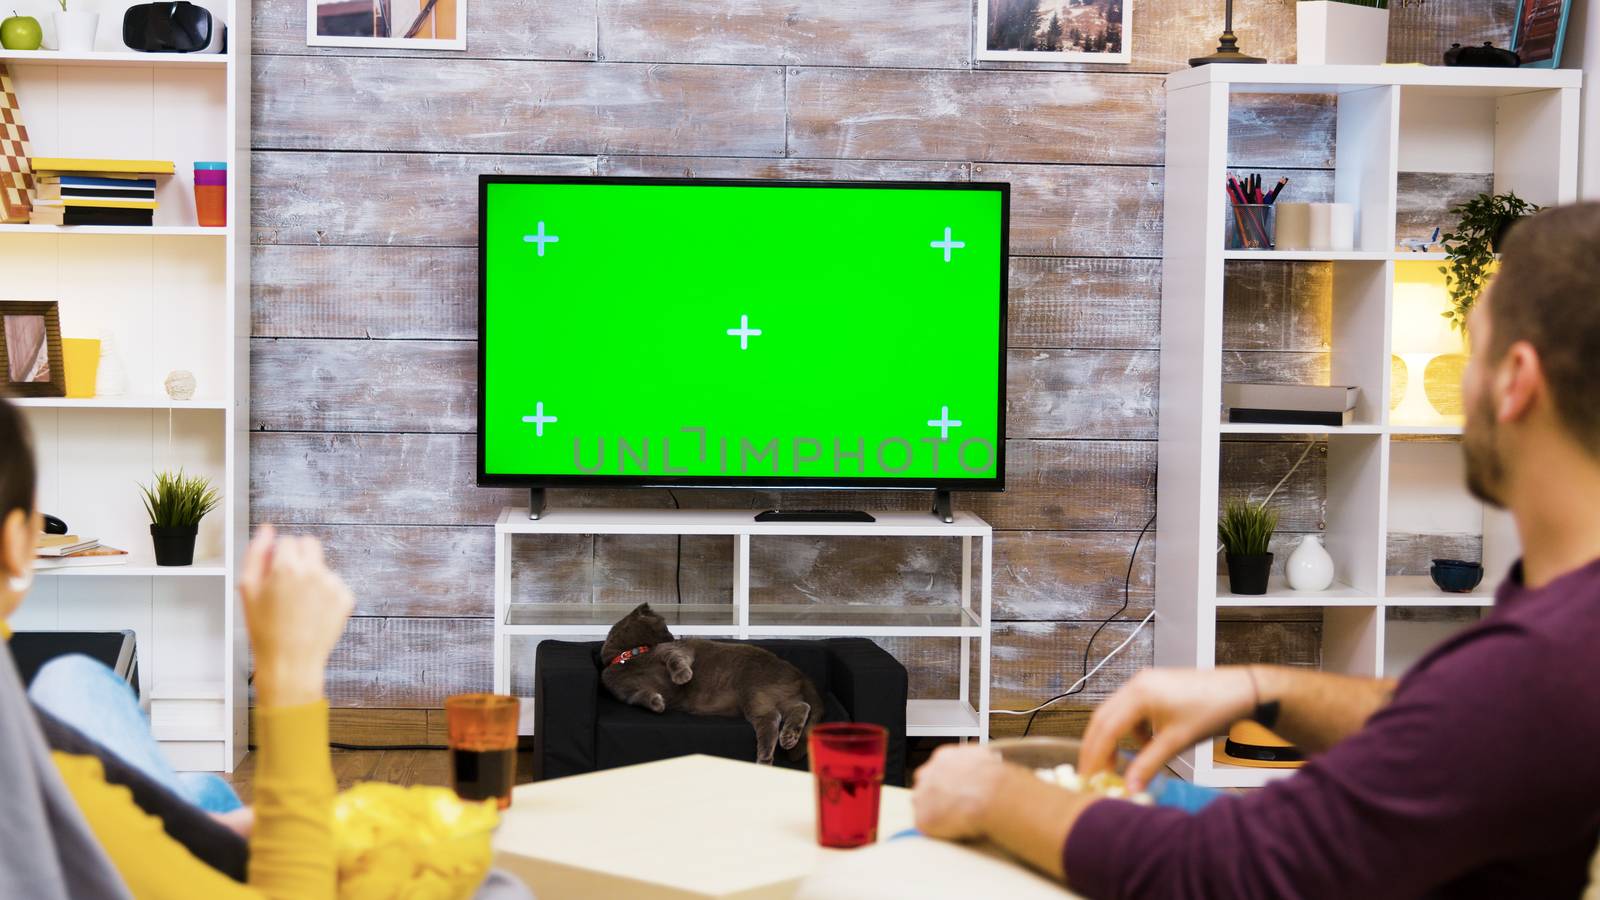 Back view of young couple sitting on chairs looking at tv with green screen, eating popcorn with the cat watching them.